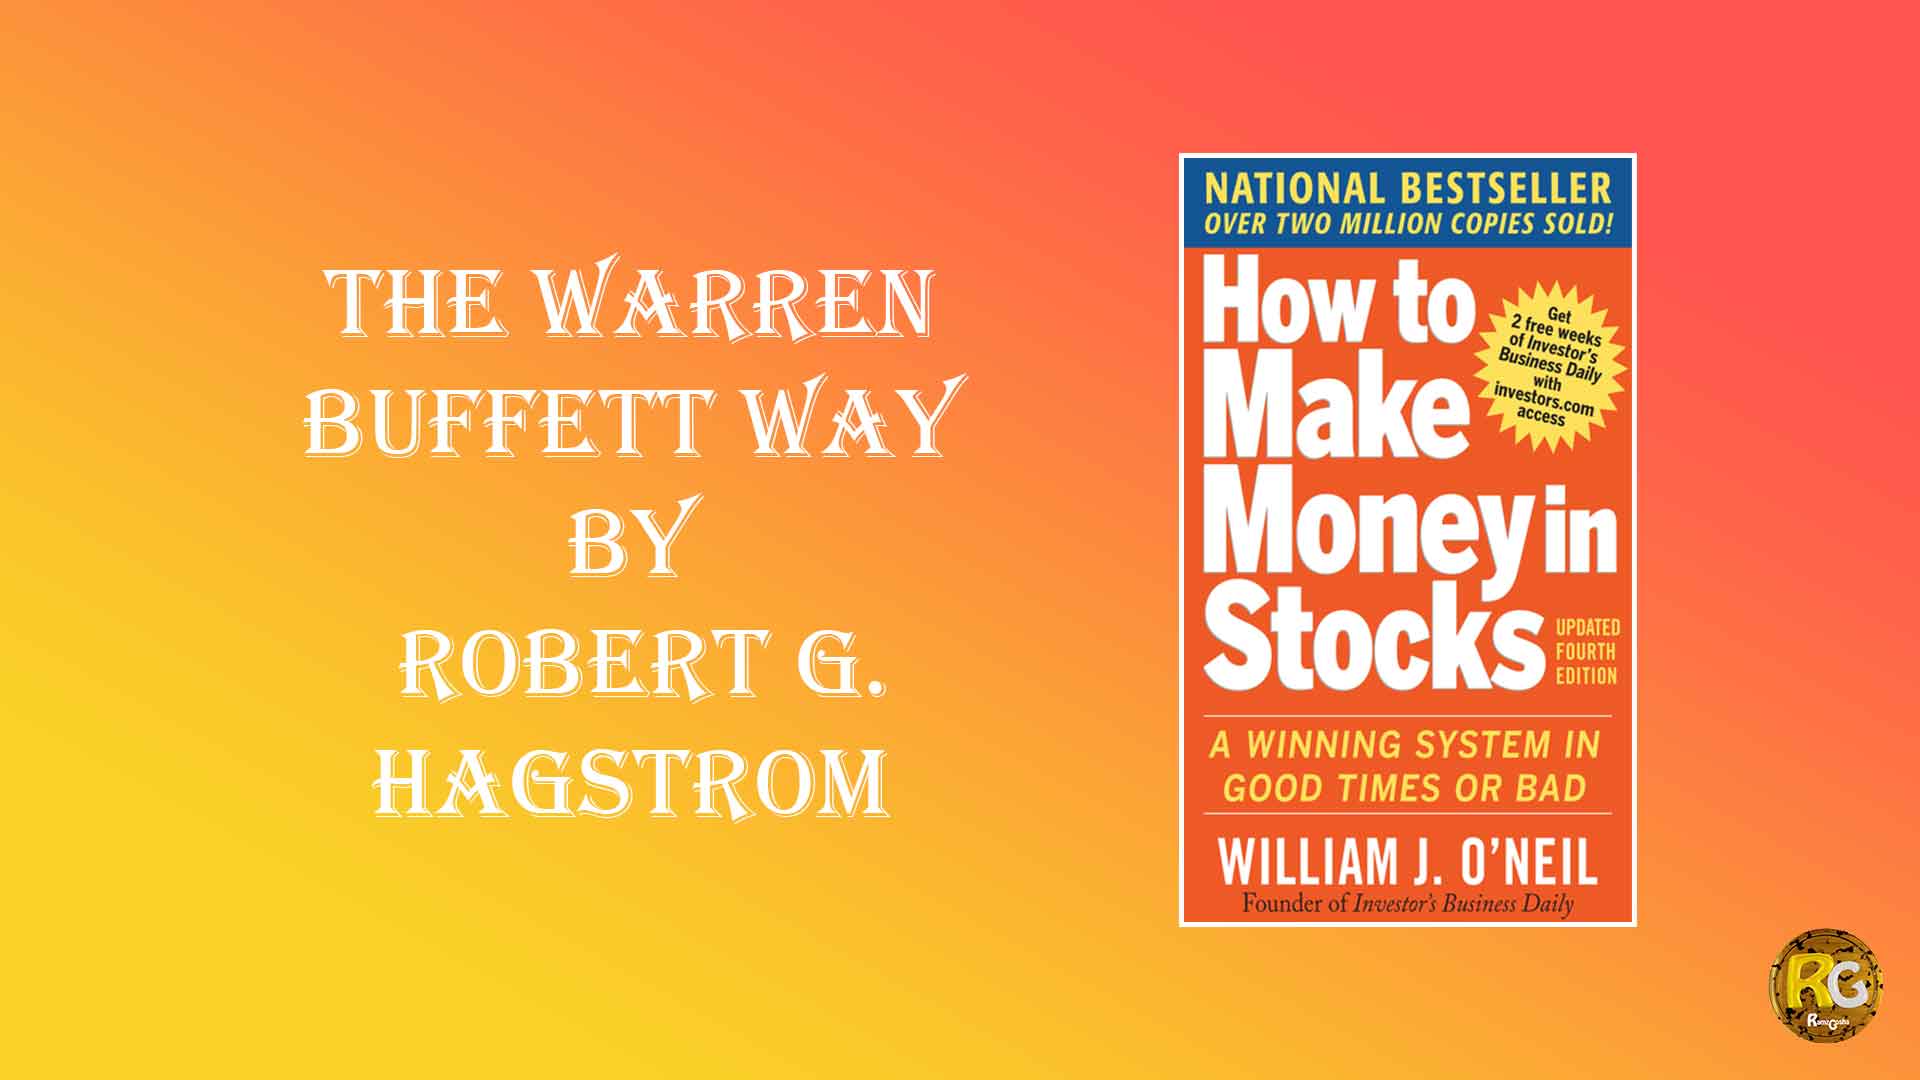 How to Make Money in Stocks by William J. O'neil